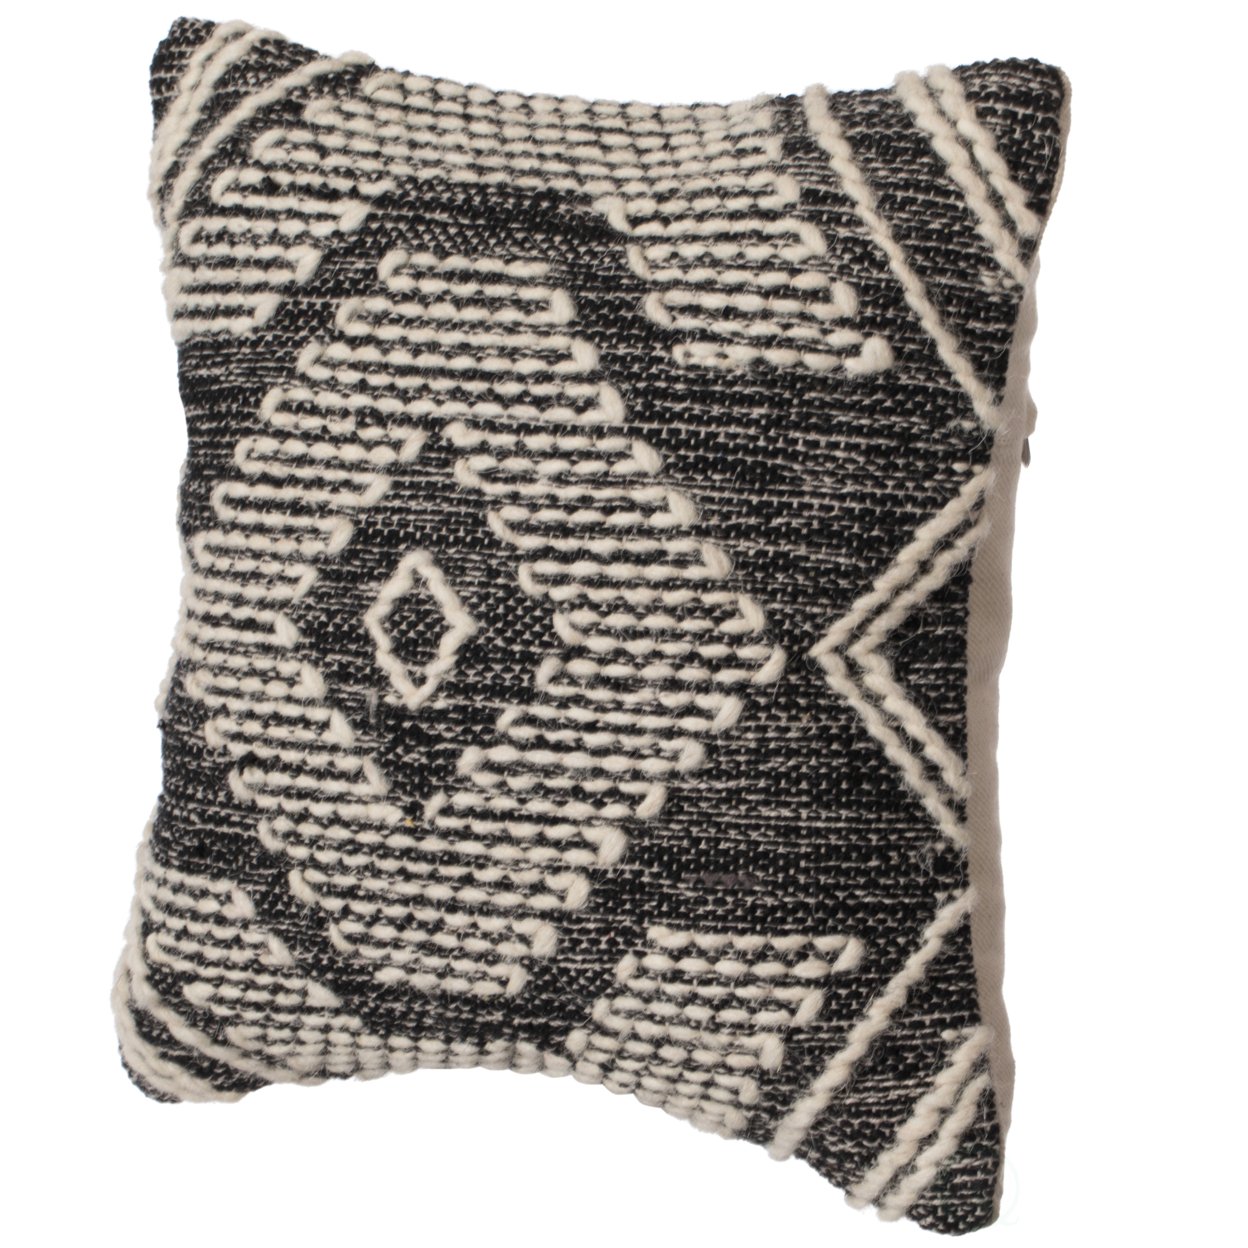 16 Throw Pillow Cover With White On Black Tribal Pattern And Corner Tassels, Black & White - Pillowcase Only